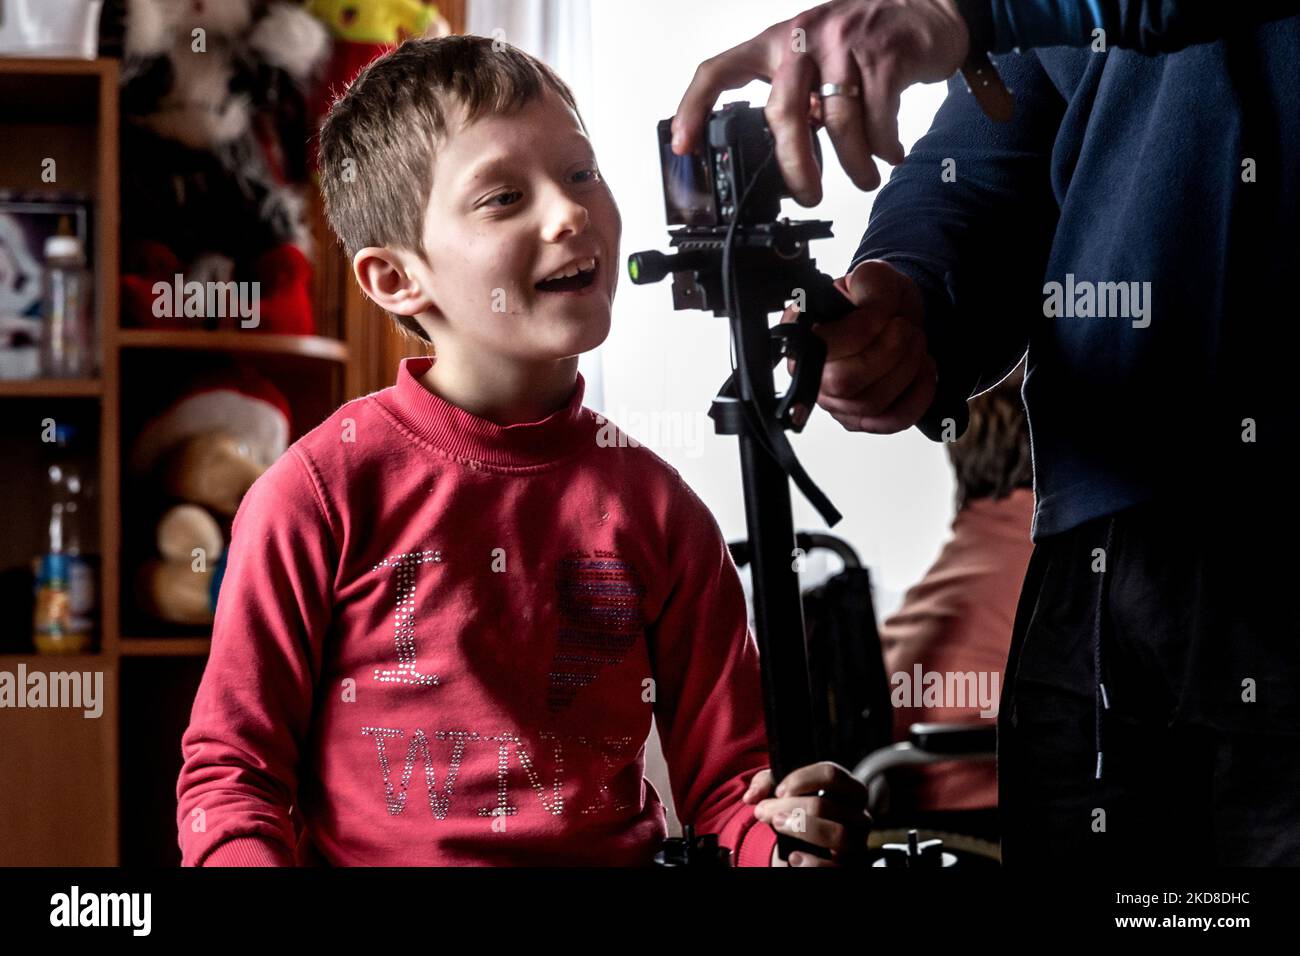 A Ukrainian girl with learning disabilities smiles as she plays with a camera provided by the photographer in a common room in a Center for women and girls with learning disabilities run by Greek Catholic church in Bukova, Lviv Oblast Ukraine on April 25, 2022. As the Russian Federation invaded Ukraine two months ago, the conflict caused that places like the Centre in Bukova become even more isolated and underfunded. (Photo by Dominika Zarzycka/NurPhoto) Stock Photo